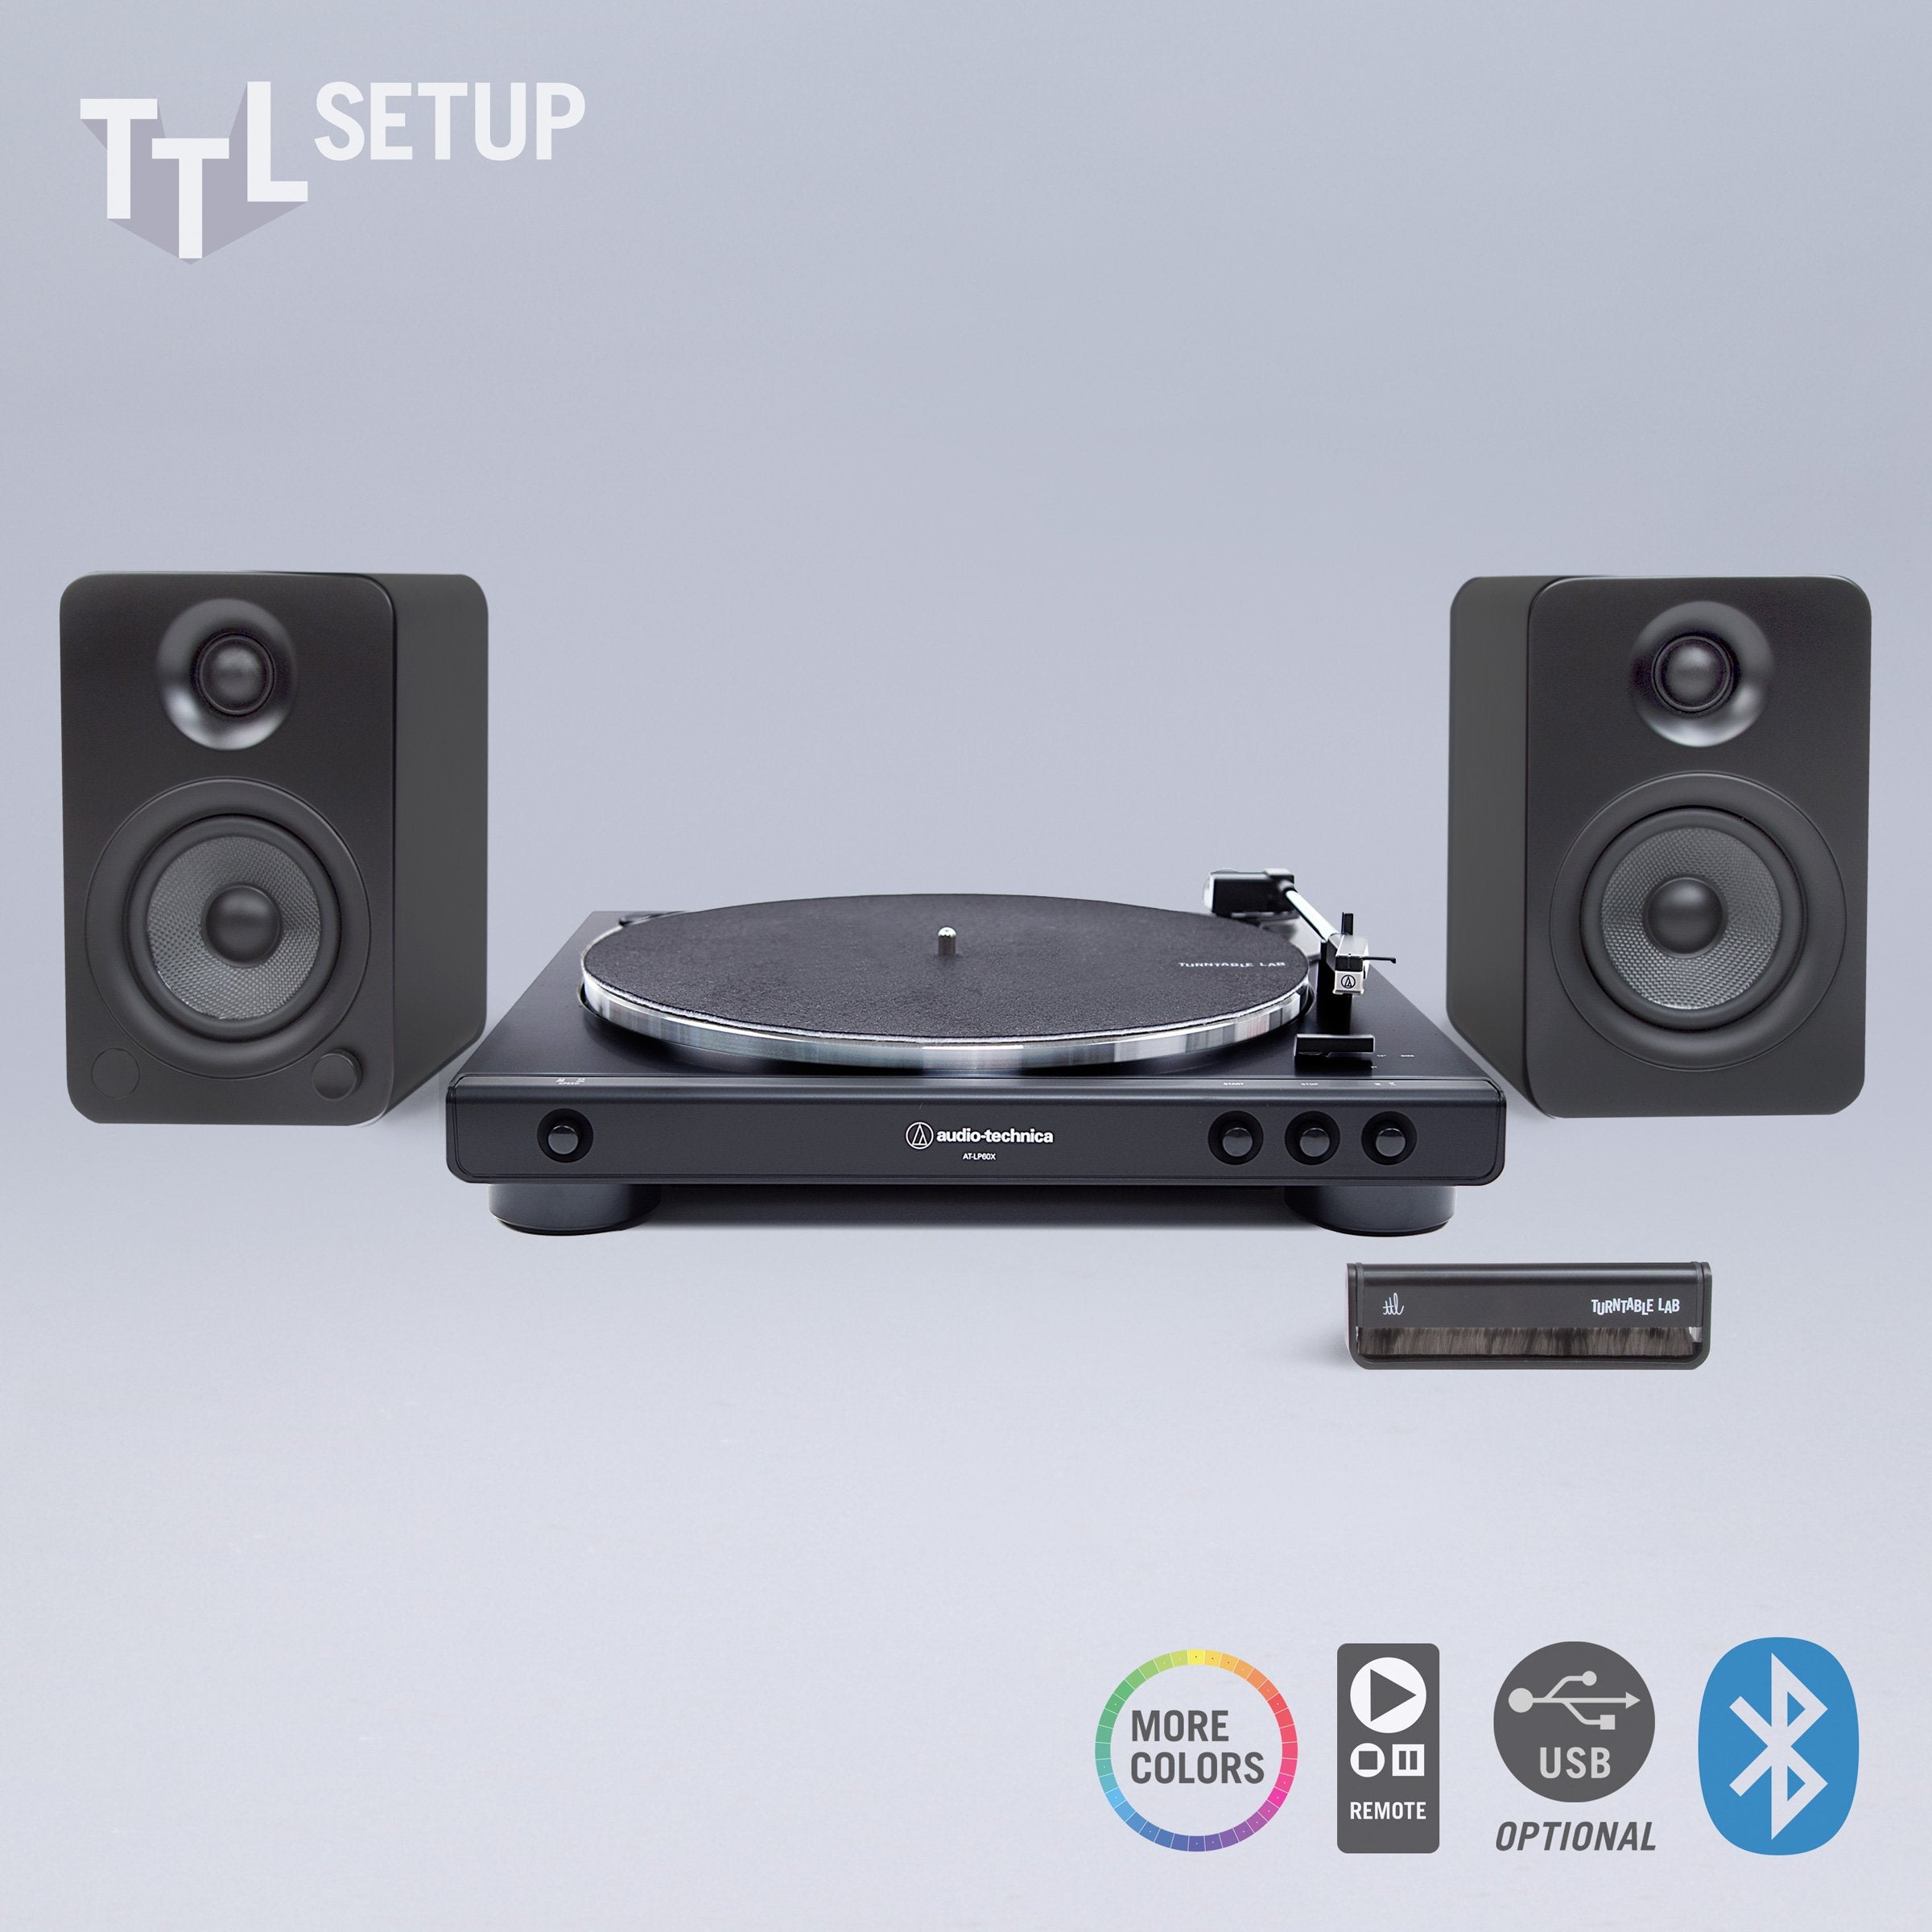 Audio-Technica: AT-LP60X / Kanto YU4 / Turntable Package